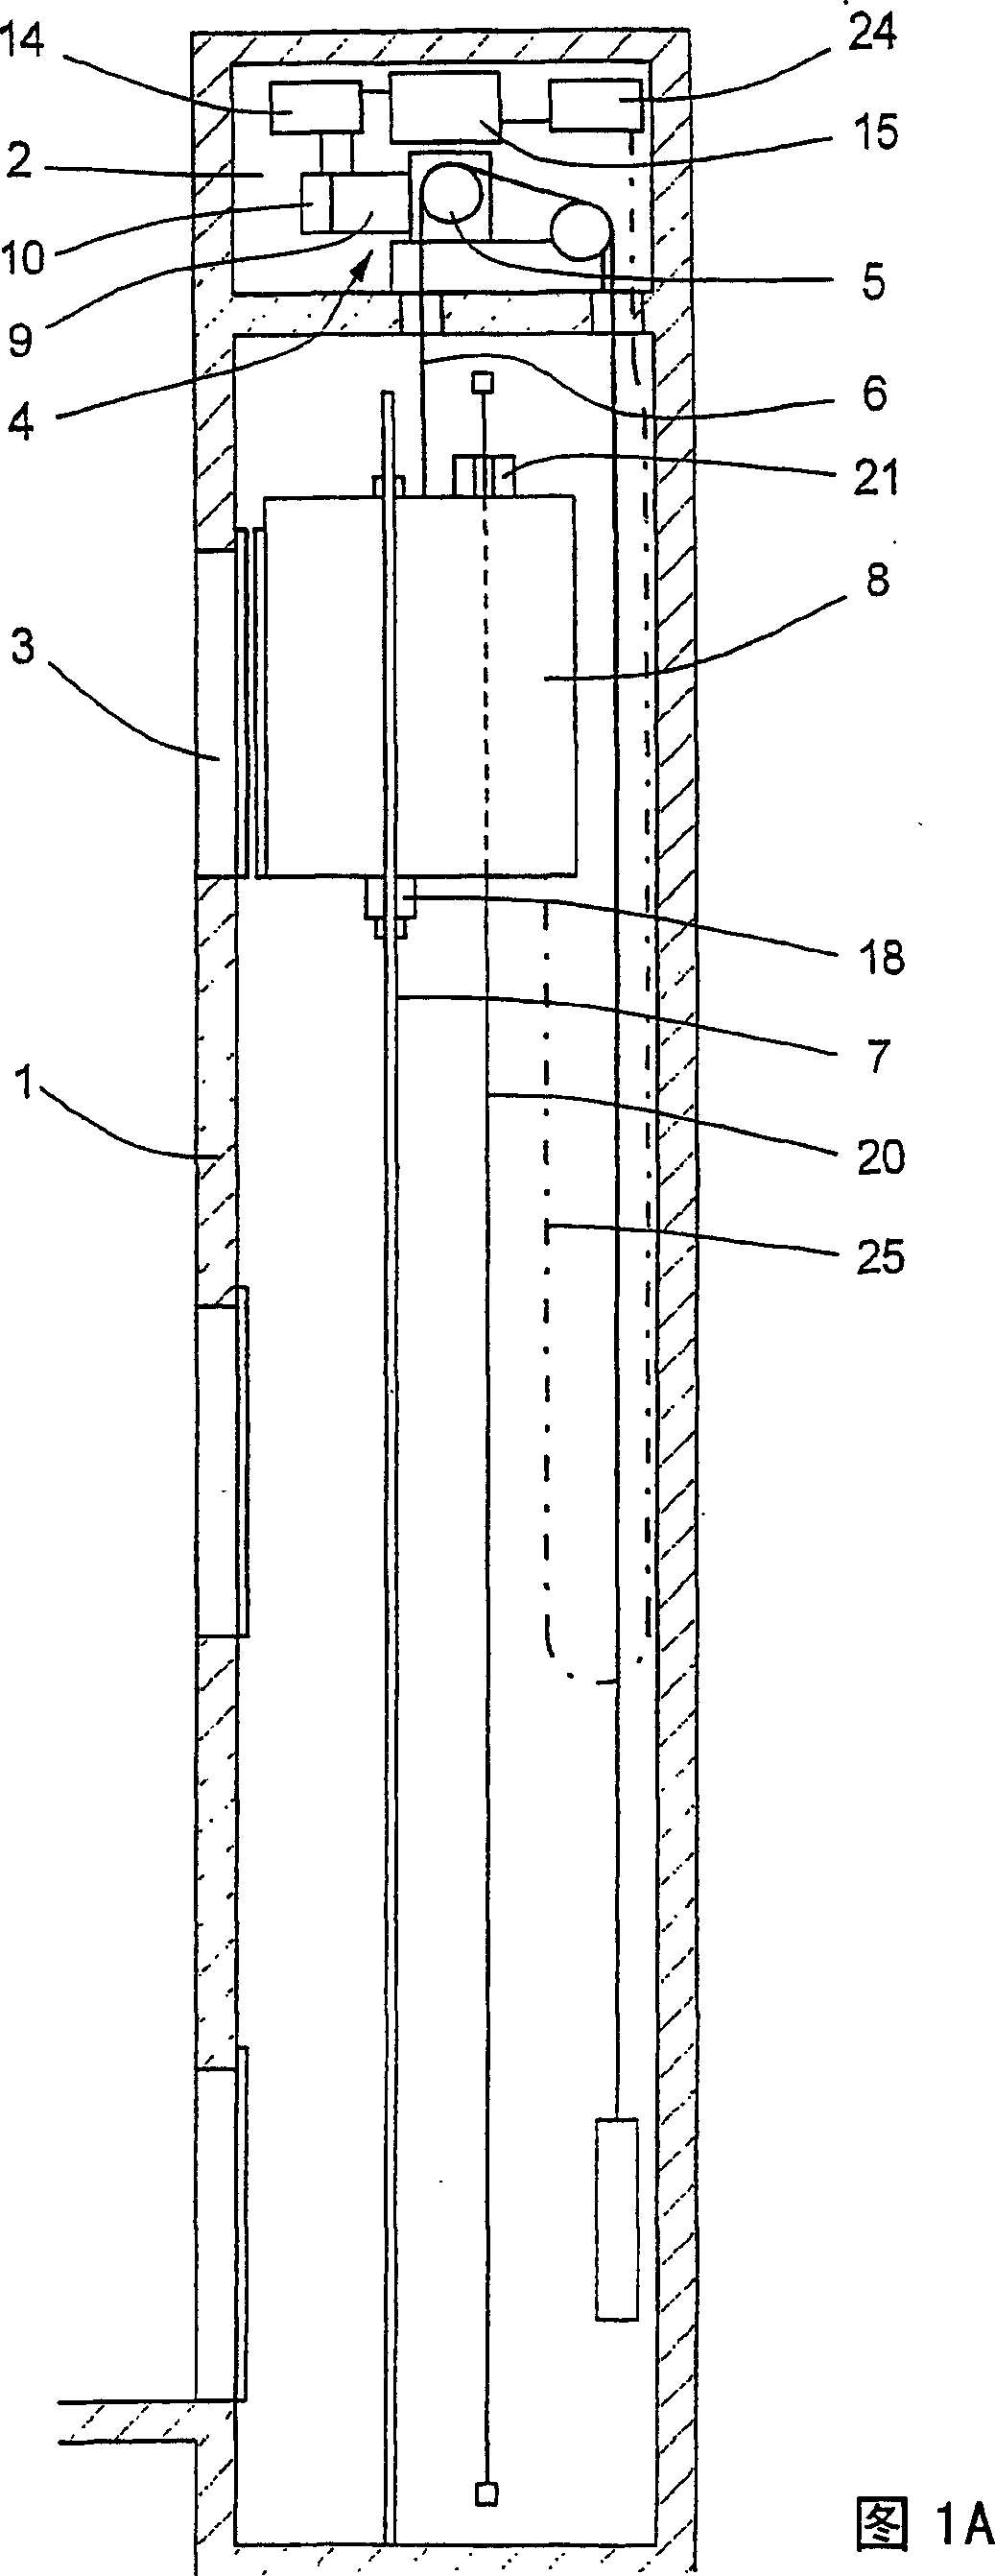 Method for preventing an inadmissibly high speed of the load receiving means of an elevator